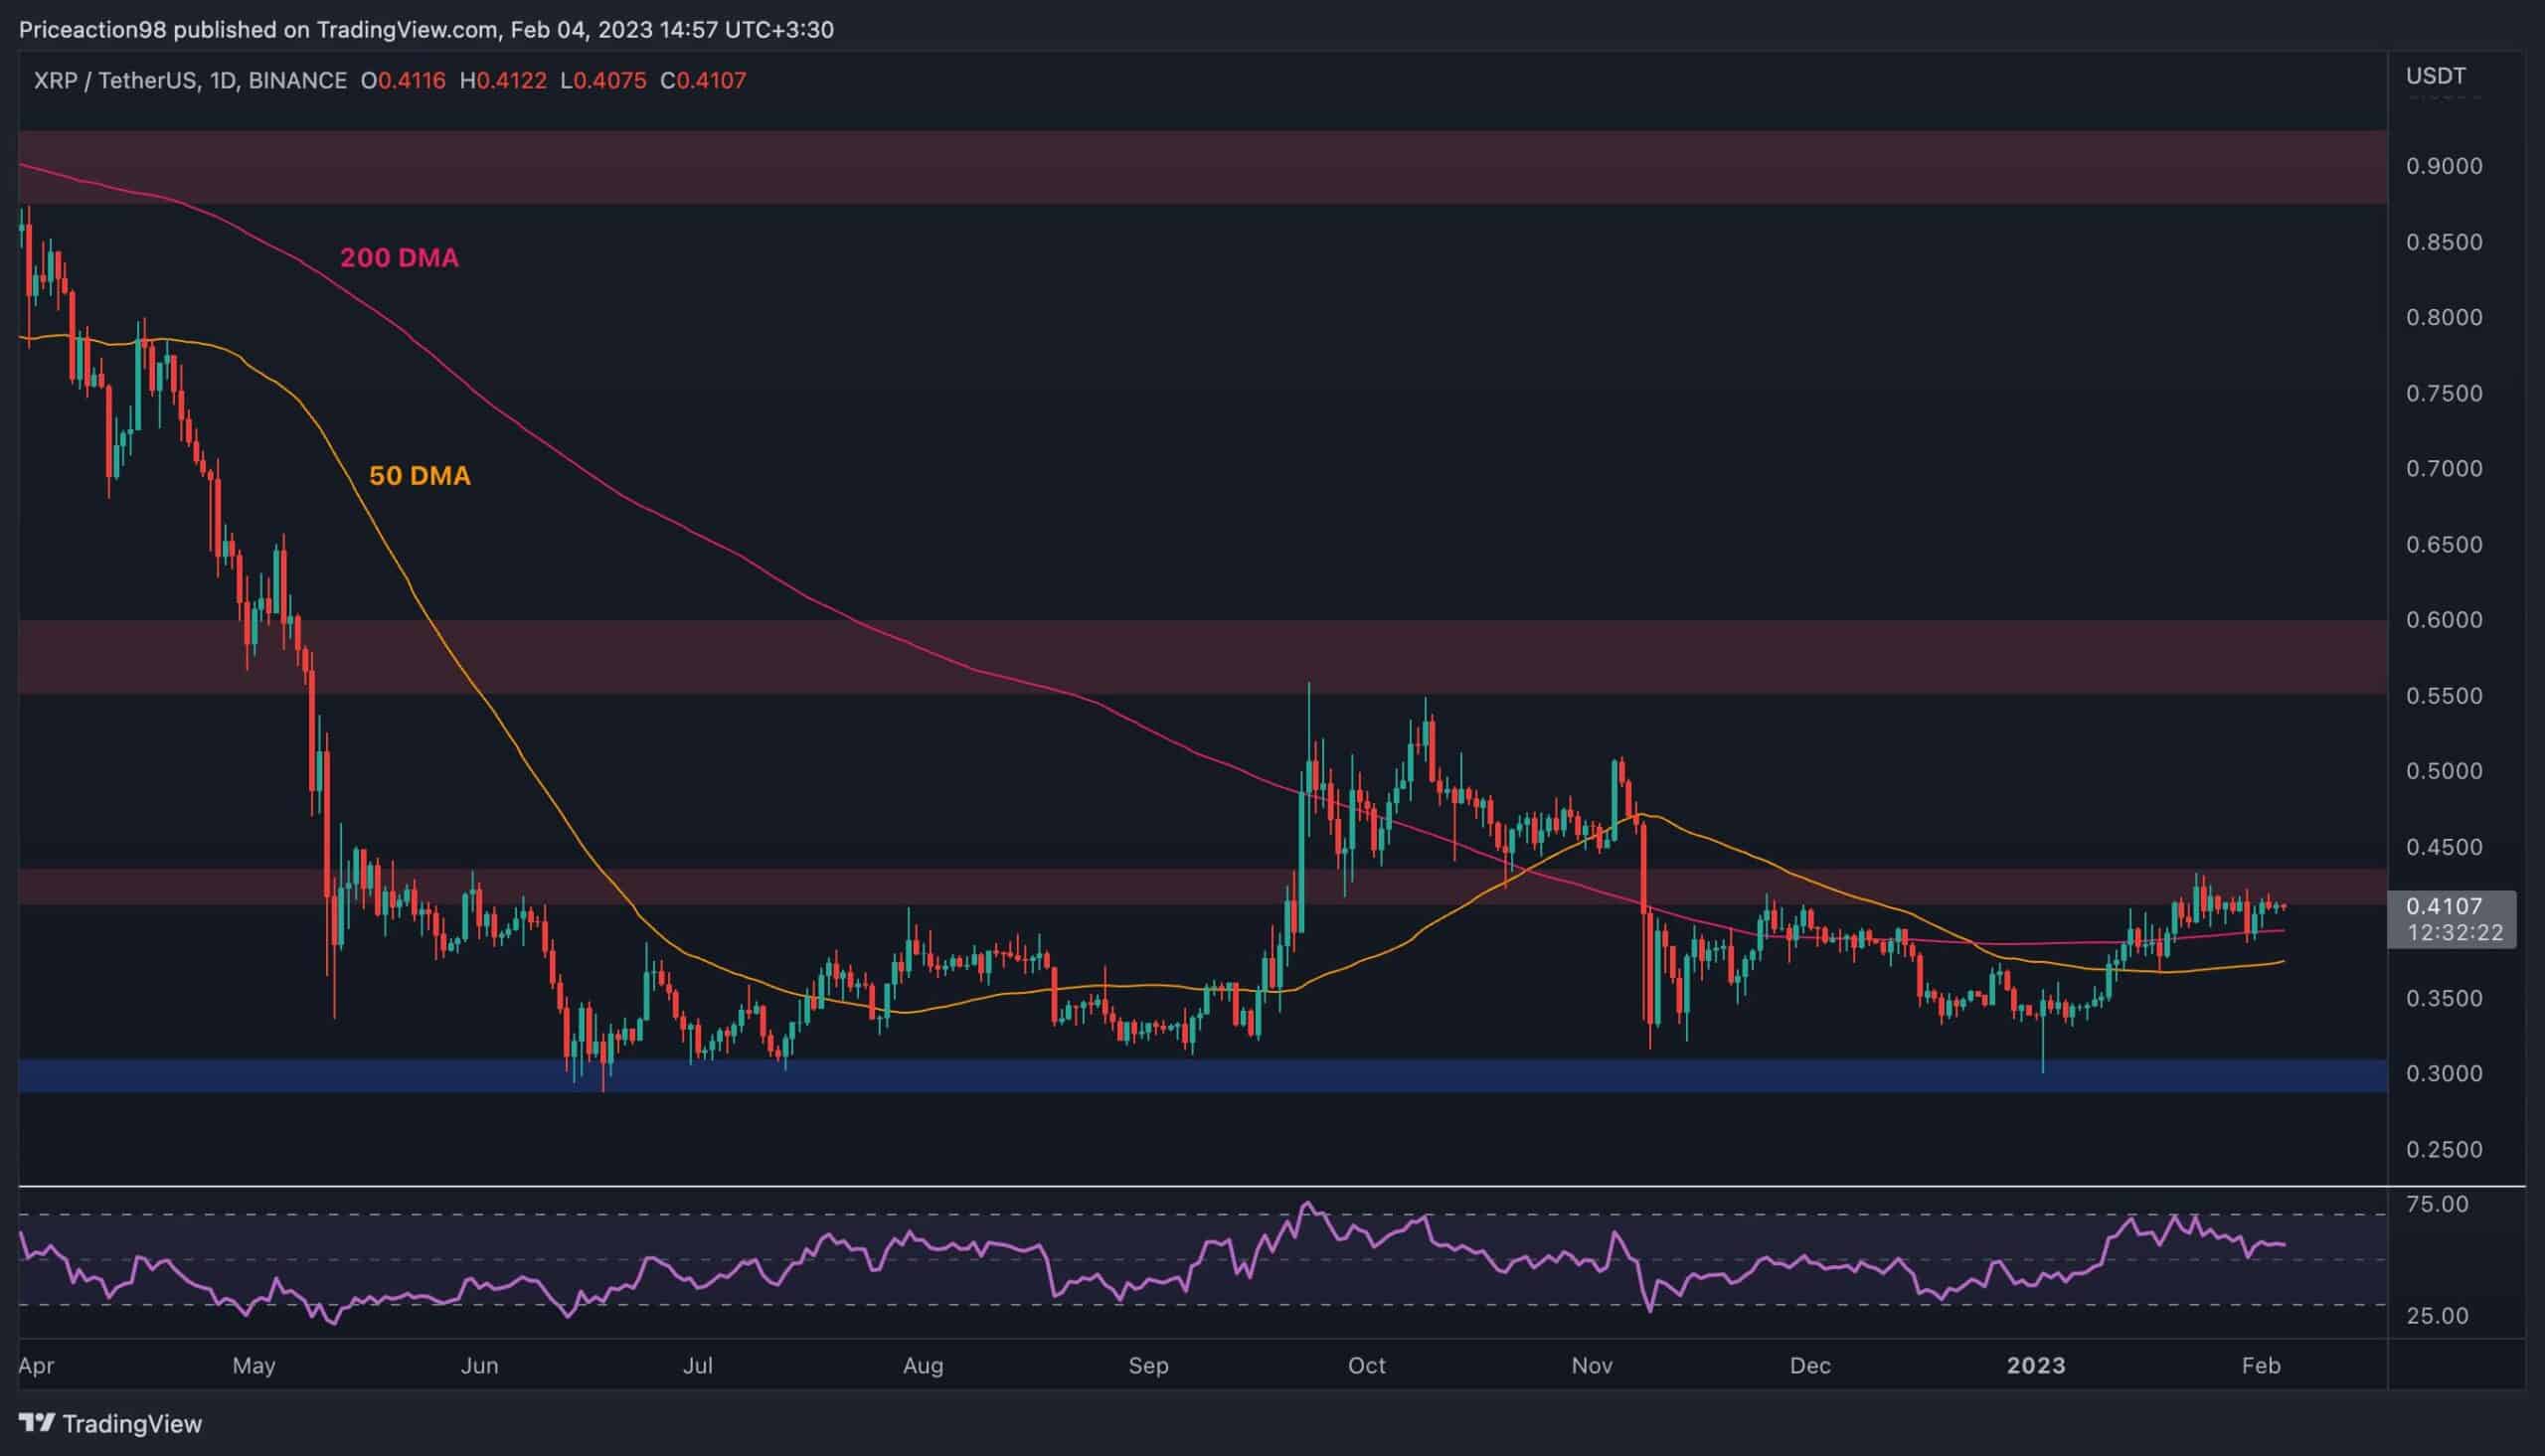 Here’s-the-next-support-for-xrp-if-$0.40-fails-(ripple-price-analysis)